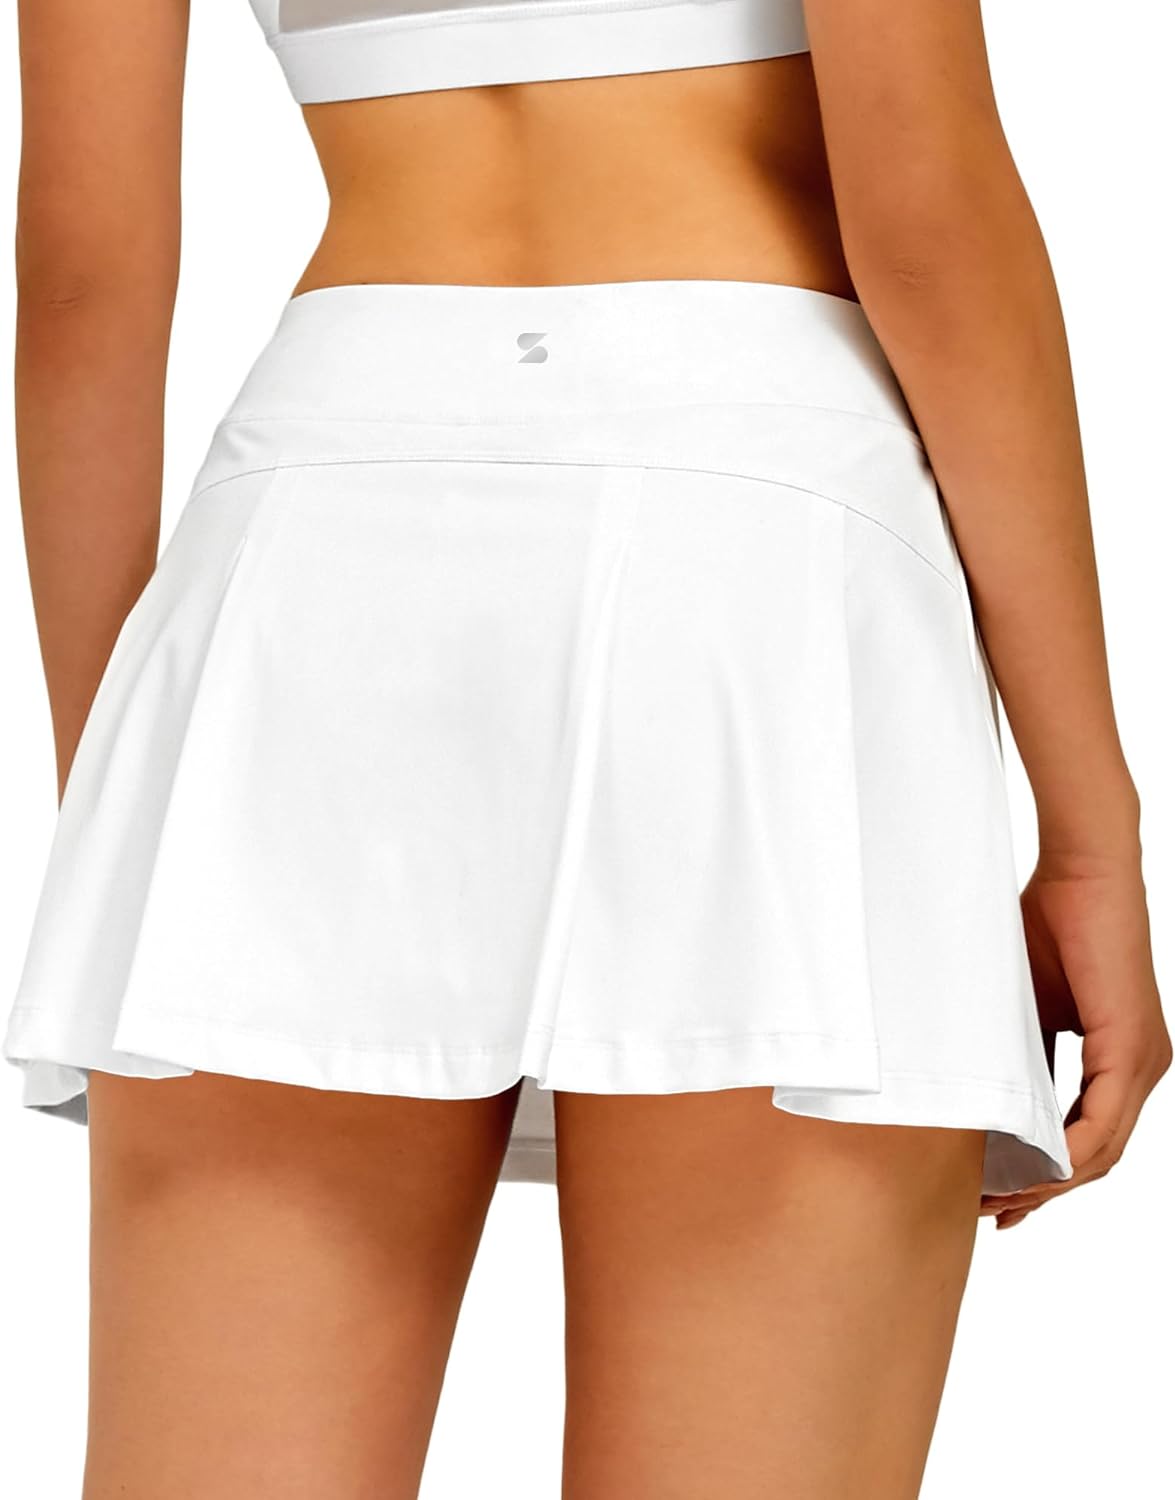 Stelle Women Tennis Skirt Golf Skorts Athletic High Waisted with Pockets Inner Shorts Sport Workout Pleated Pickleball